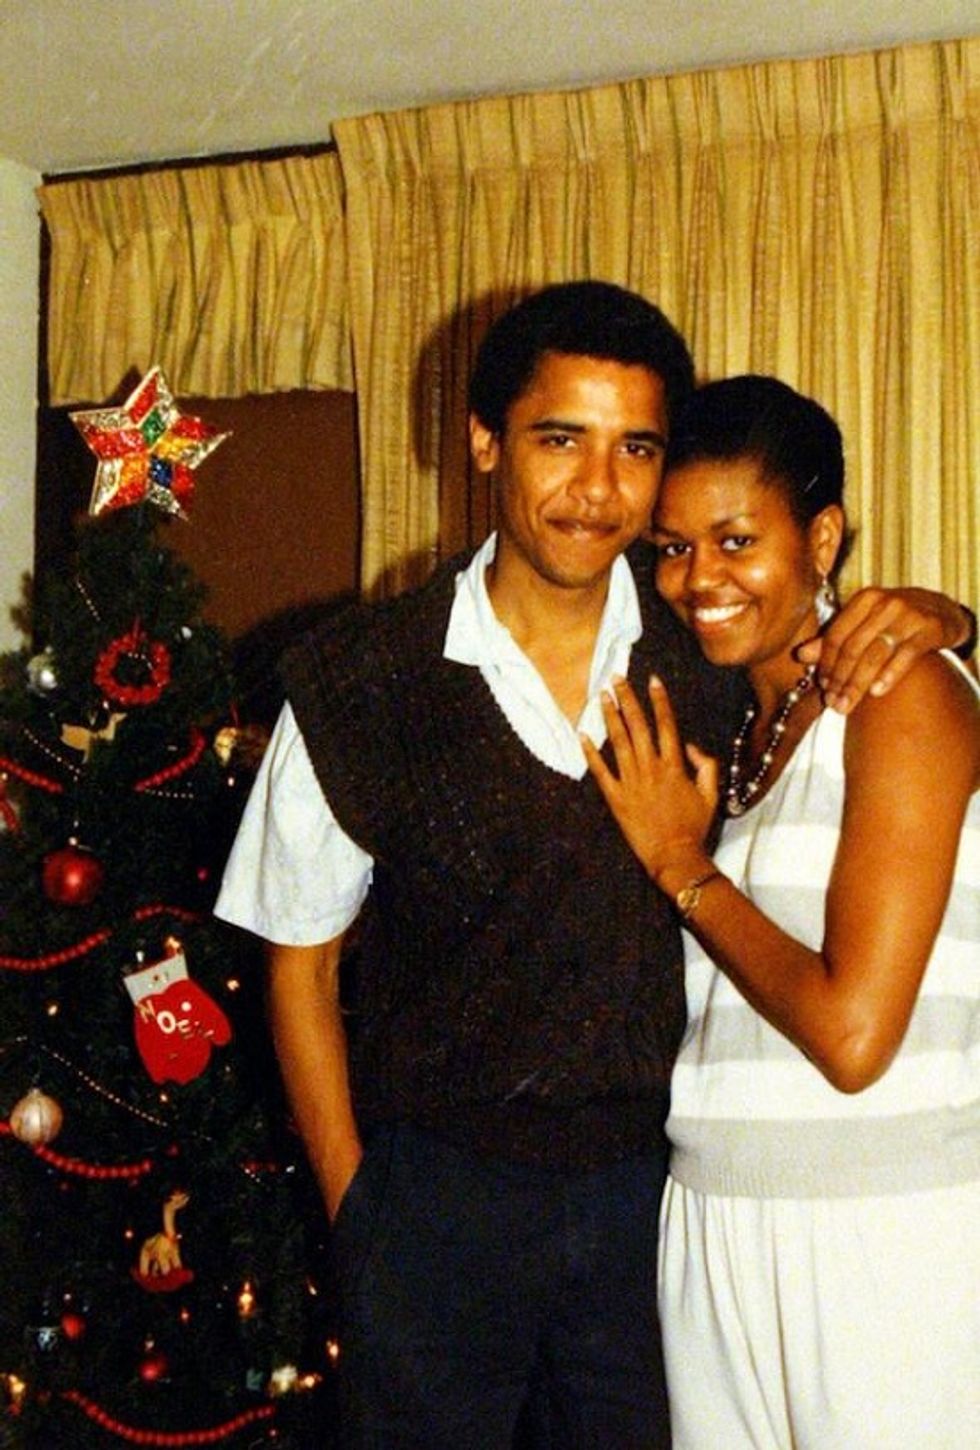 Obamas Can't Help Dragging Race Into Kwanzaa Statement